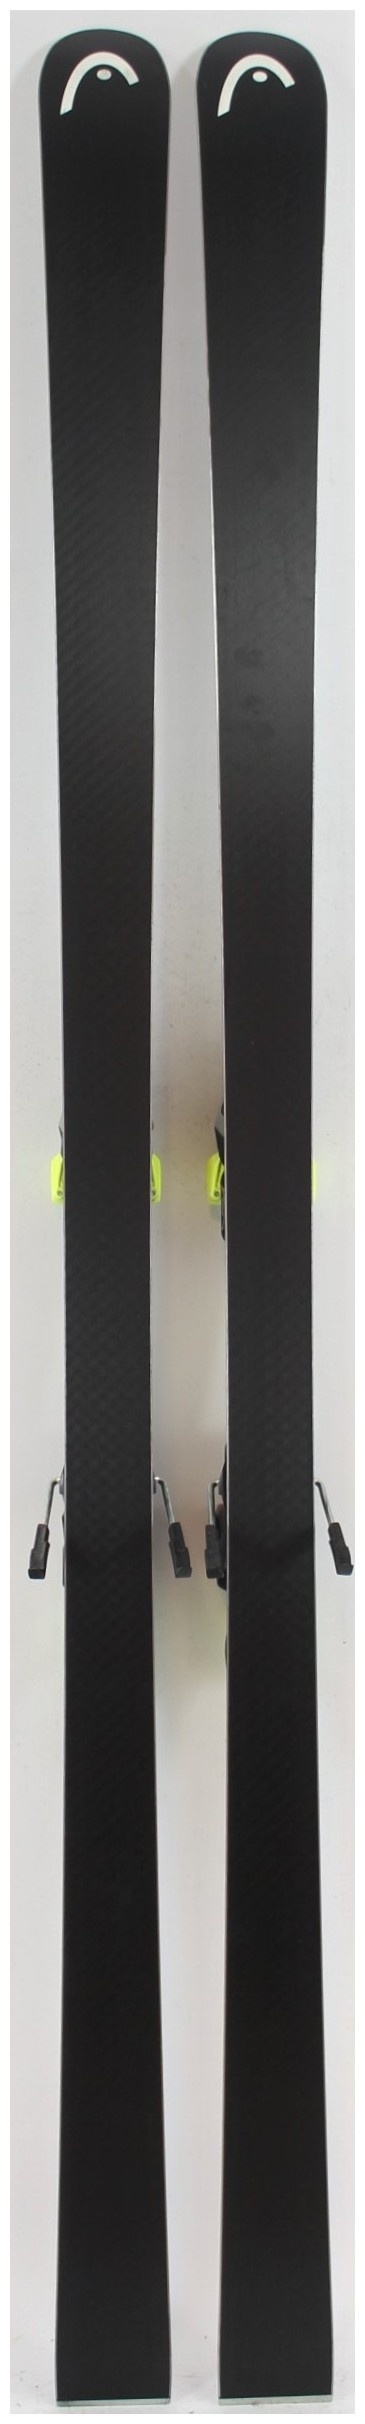 2018 Head Worldcup Rebels I.GS RD 181cm Used Demo Skis on Sale 